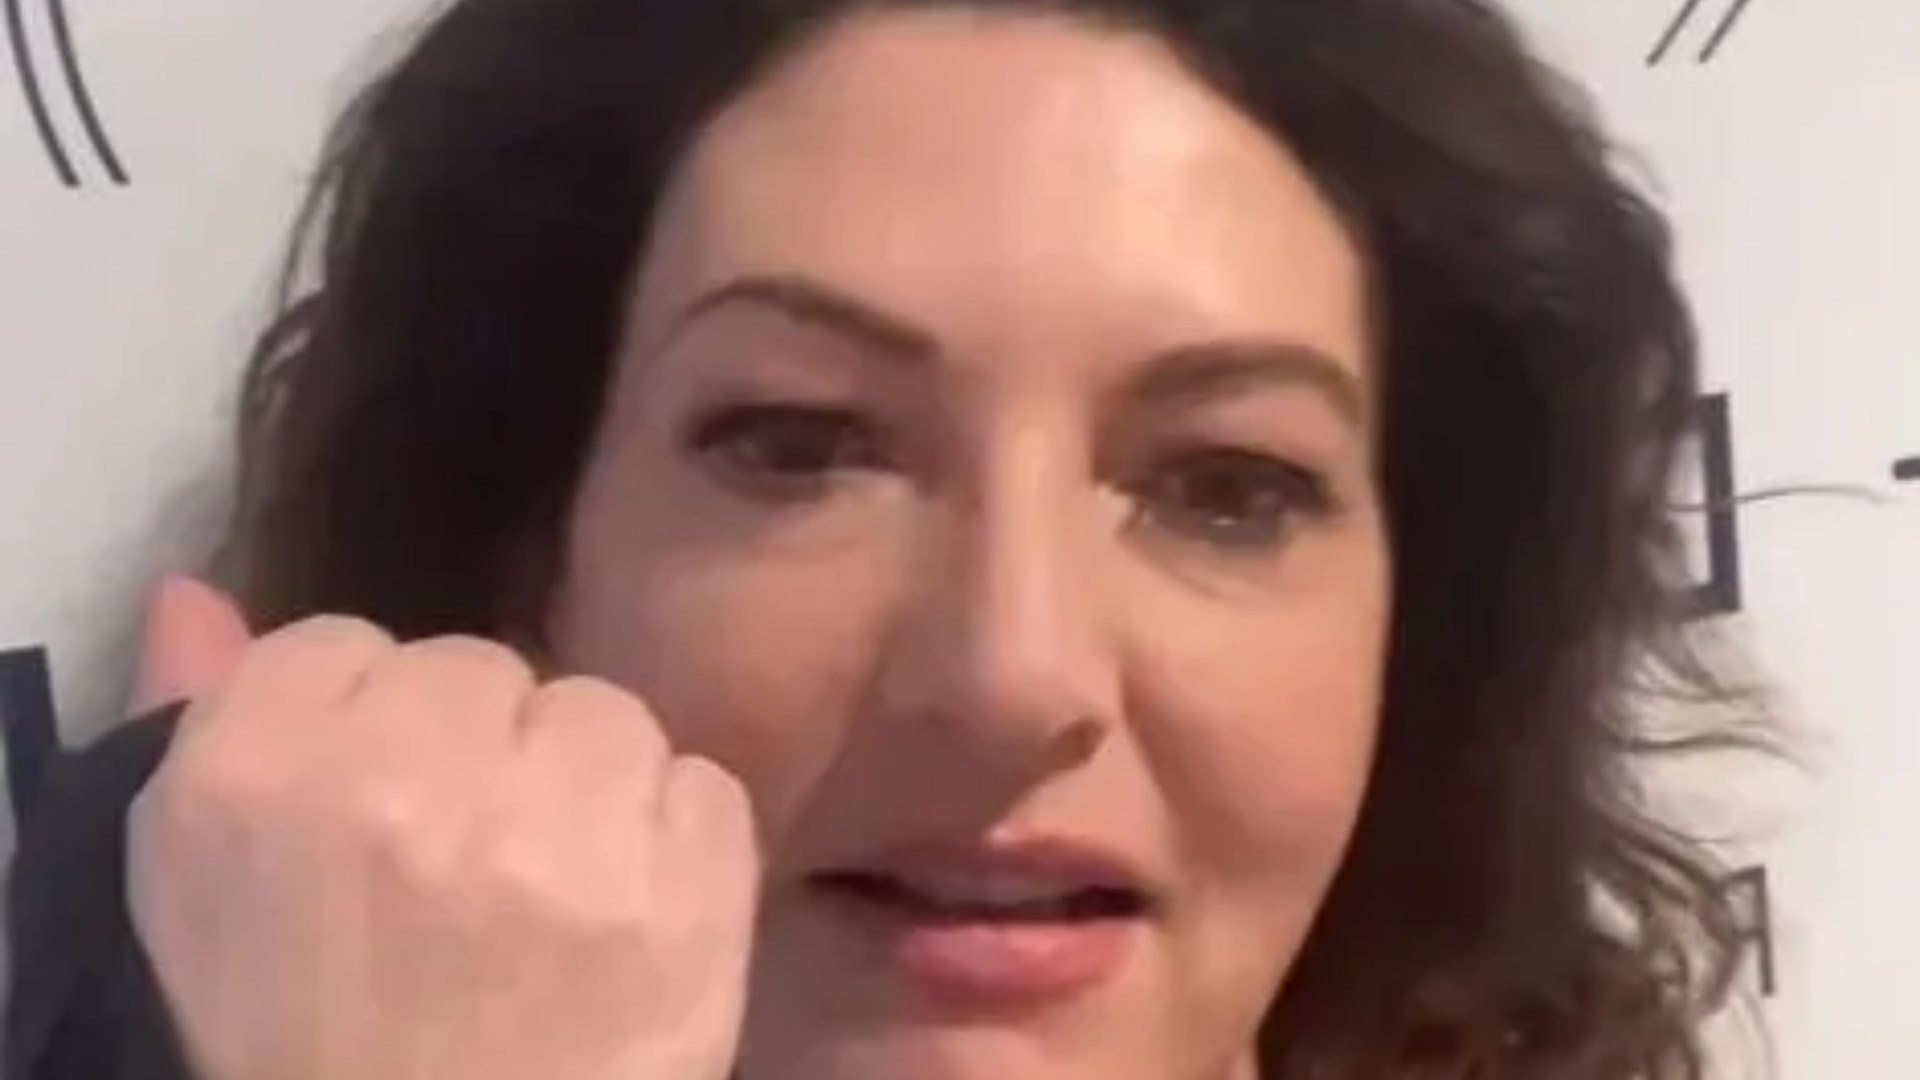 RTE’s Maura Derrane suffers horror injury on way to work before going on air as celeb pals wish her ‘speedy recovery’ [Video]